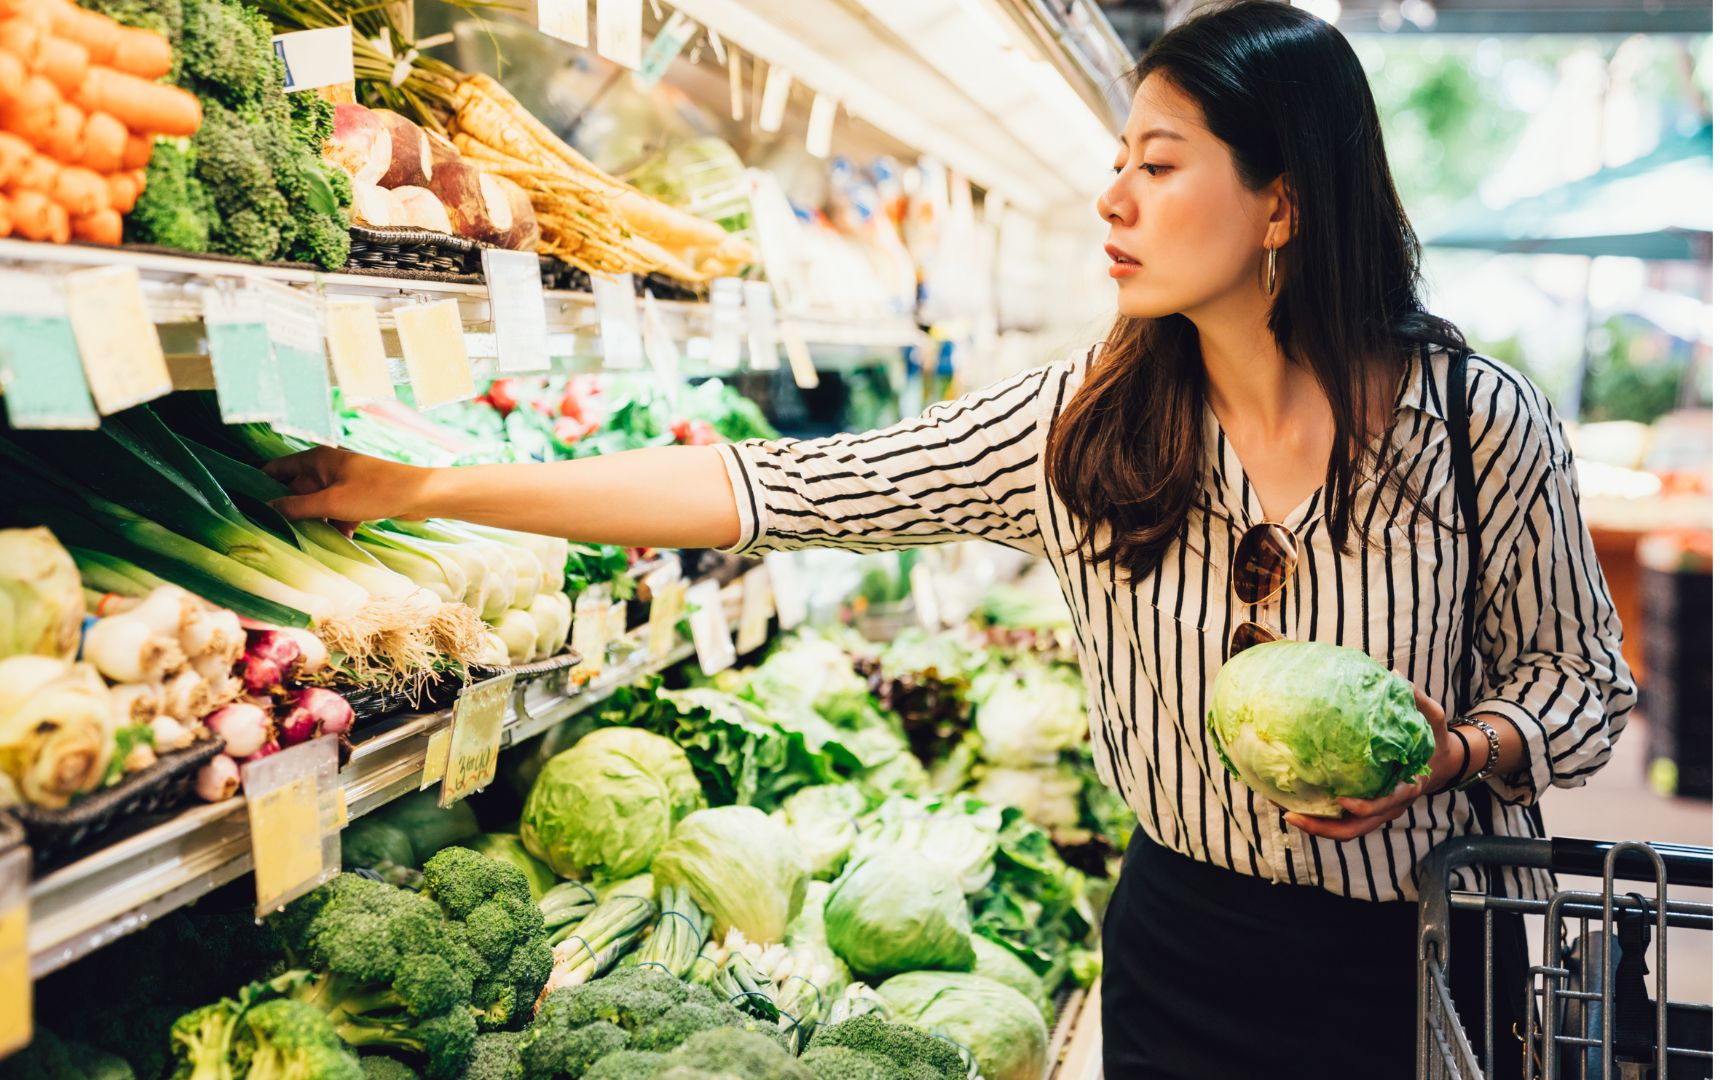 Woman Looking at Product While Grocery Shopping